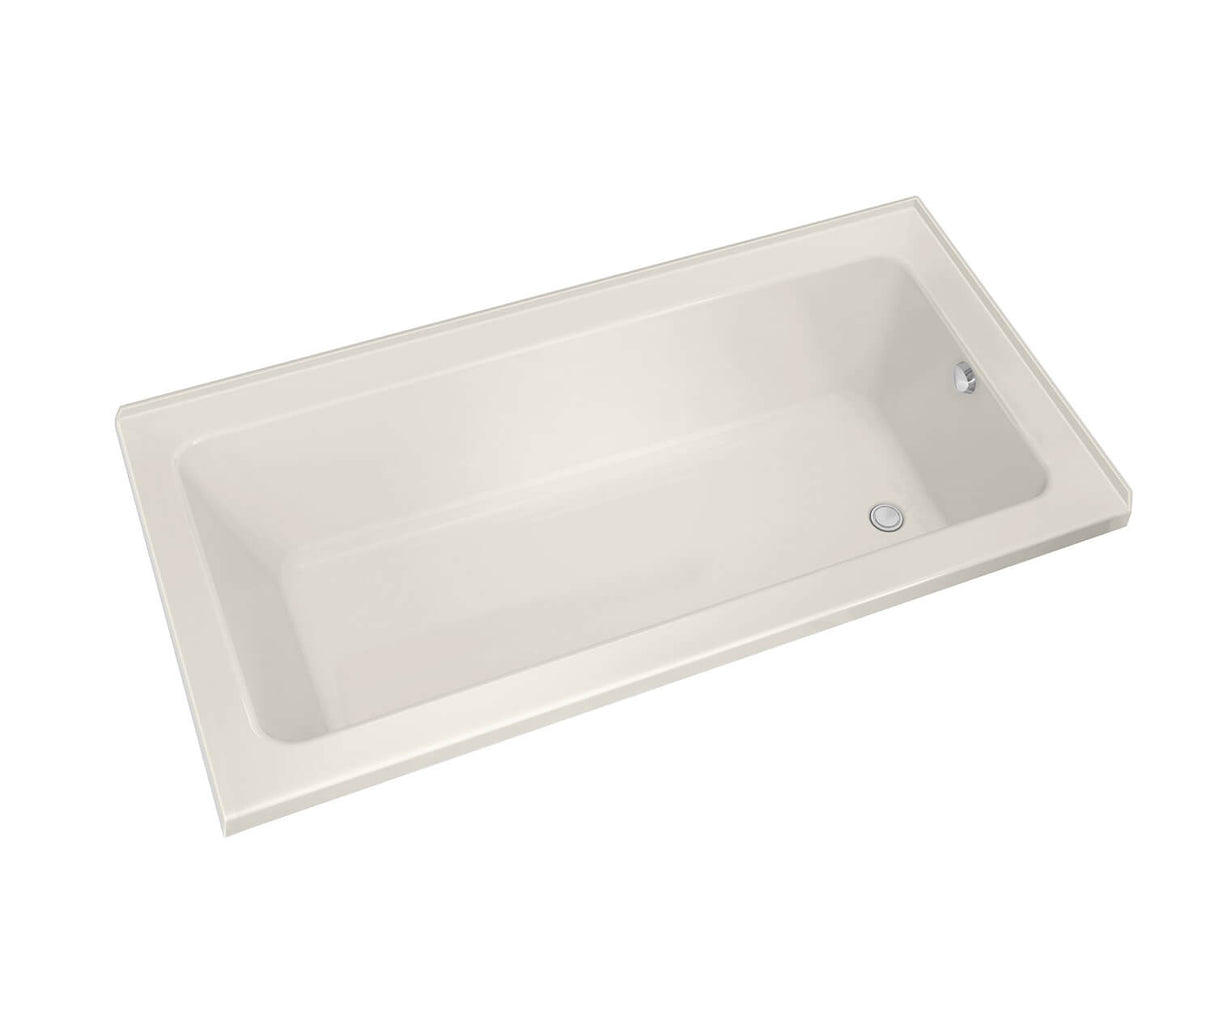 MAAX 106200-L-003-007 Pose 6030 IF Acrylic Corner Right Left-Hand Drain Whirlpool Bathtub in Biscuit